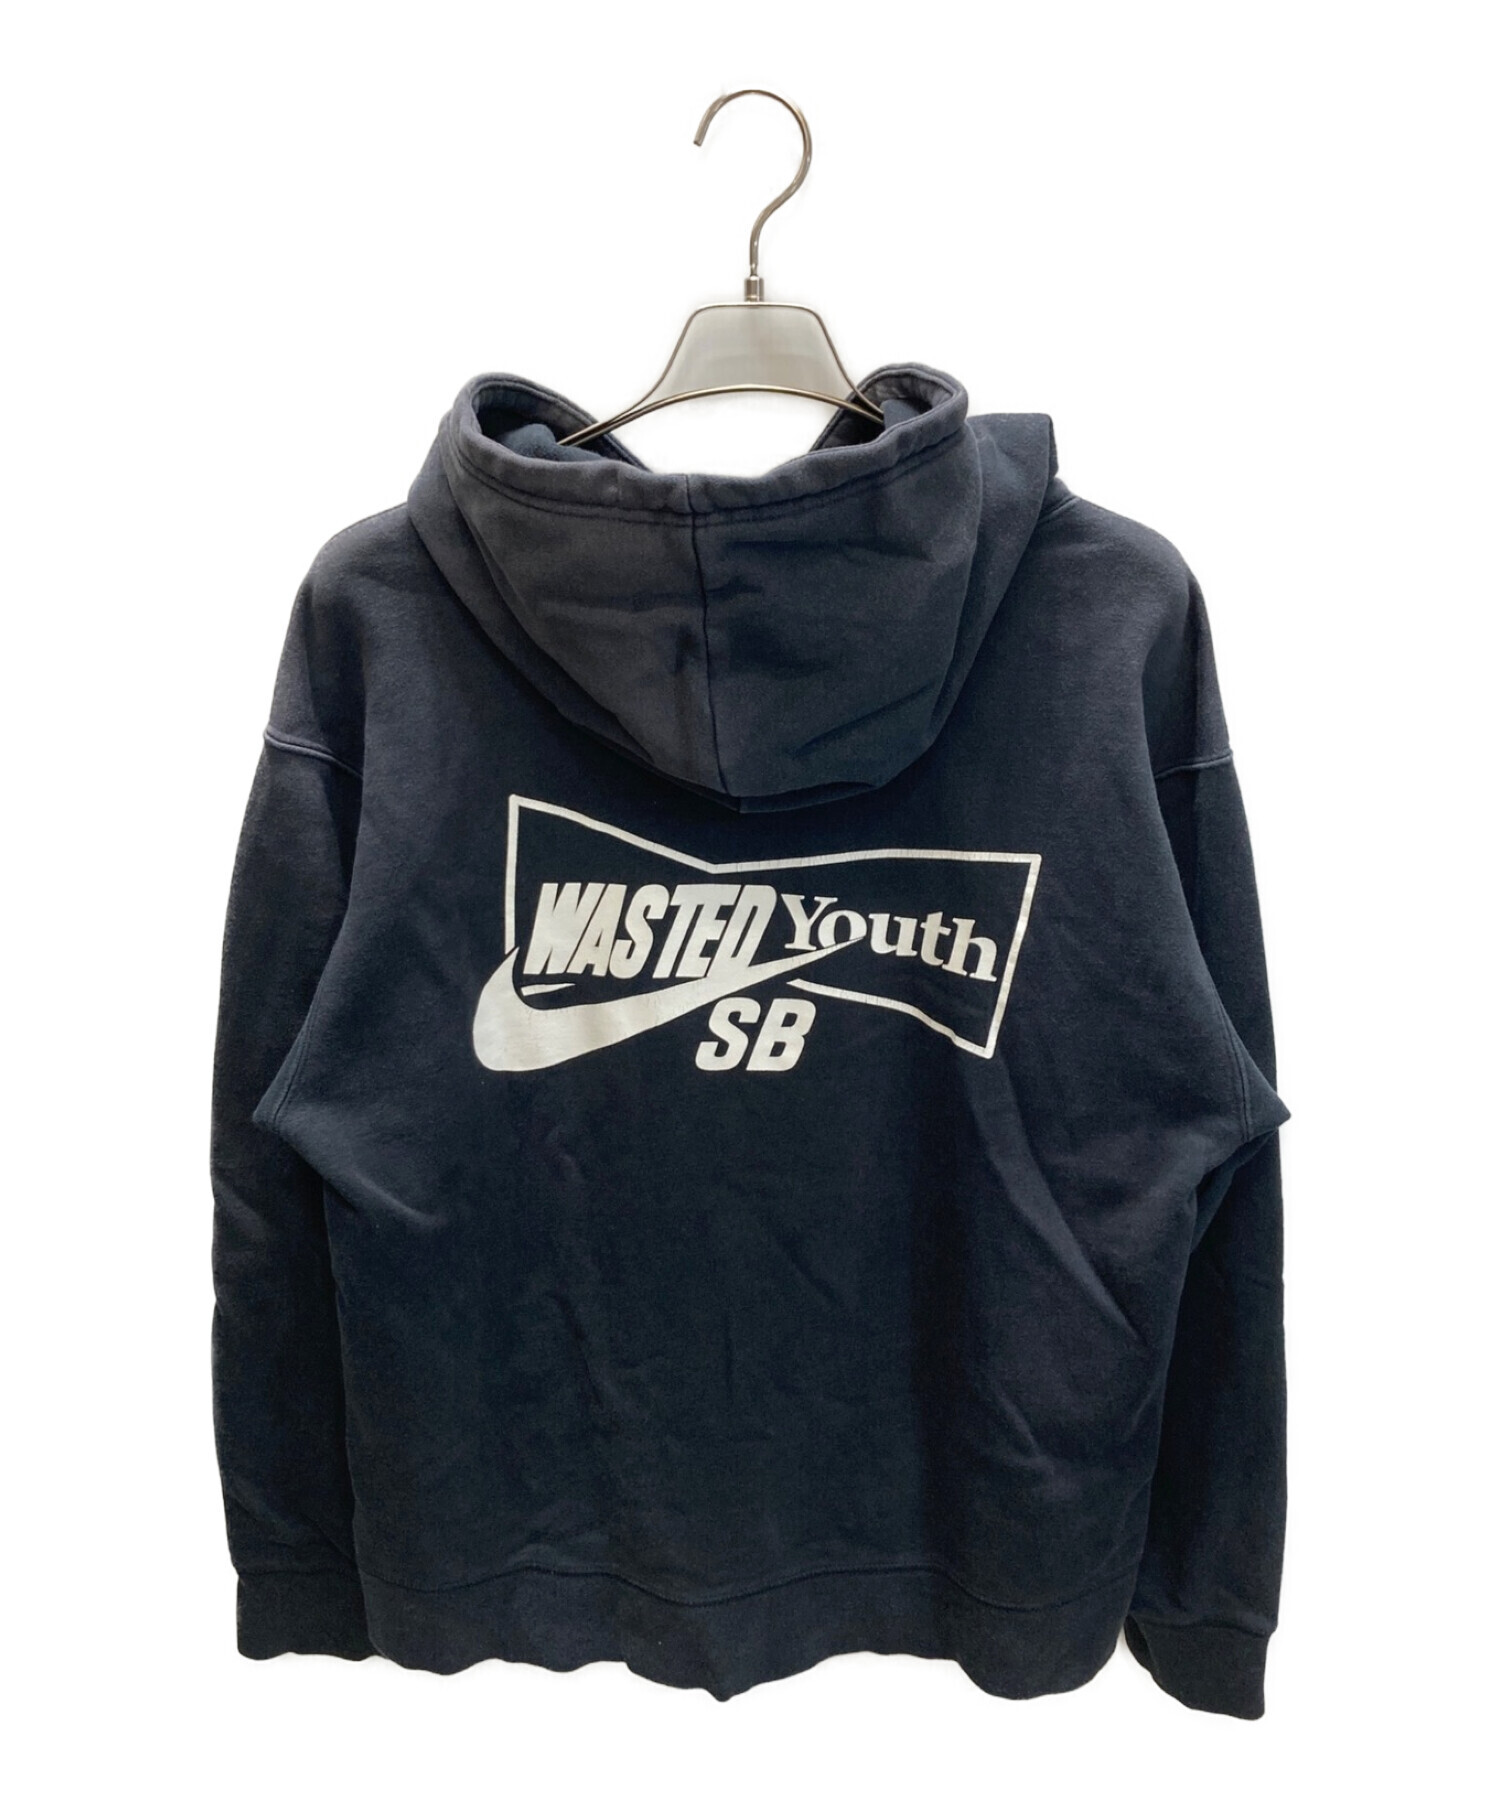 wasted youth パーカー L